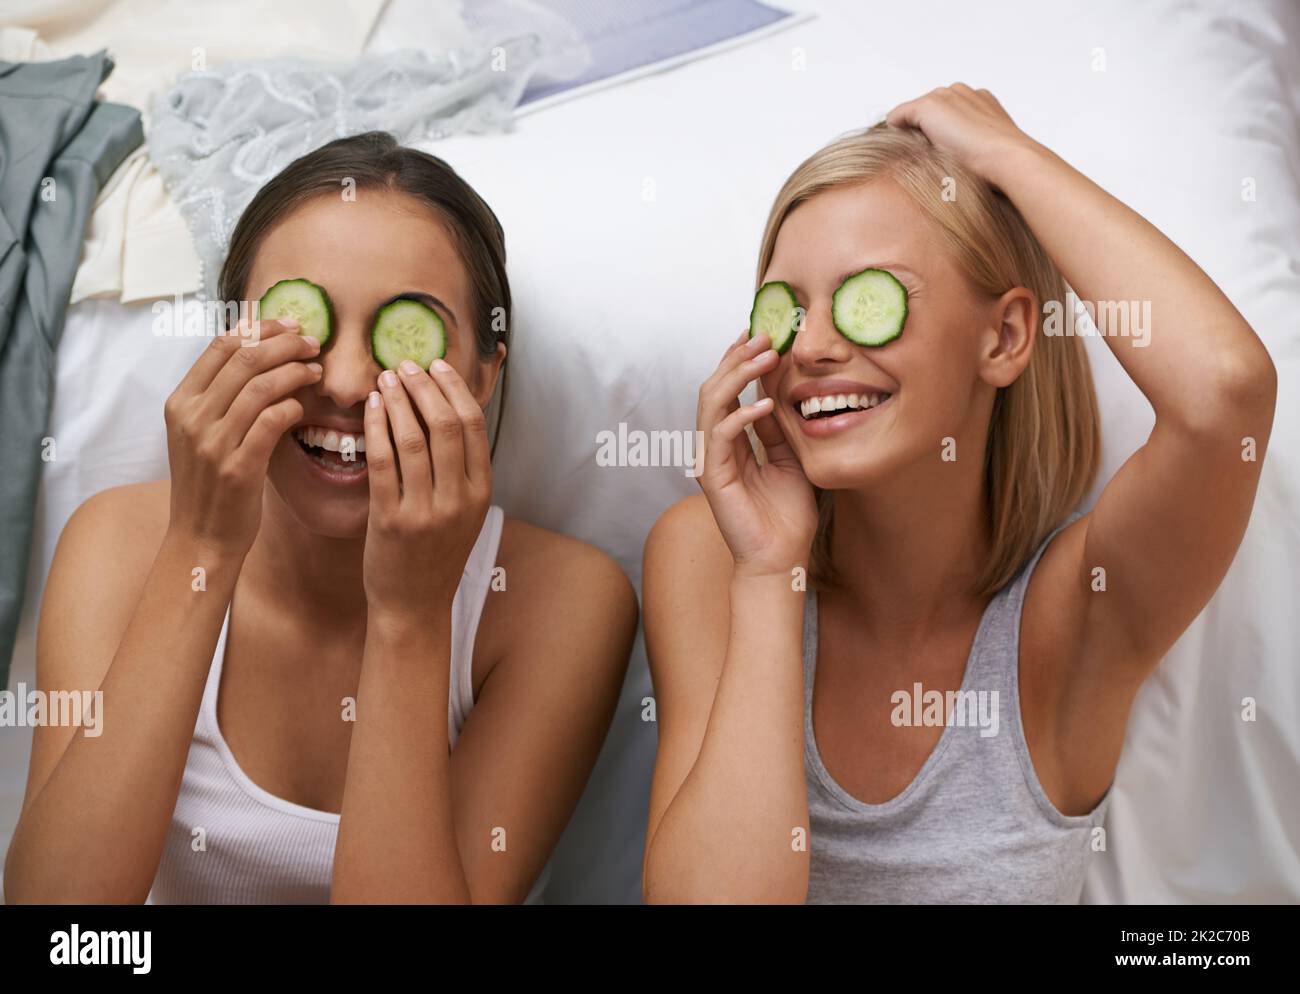 Beauty routines are always fun with my best friend. Two young women pampering themselves at a sleepover. Stock Photo